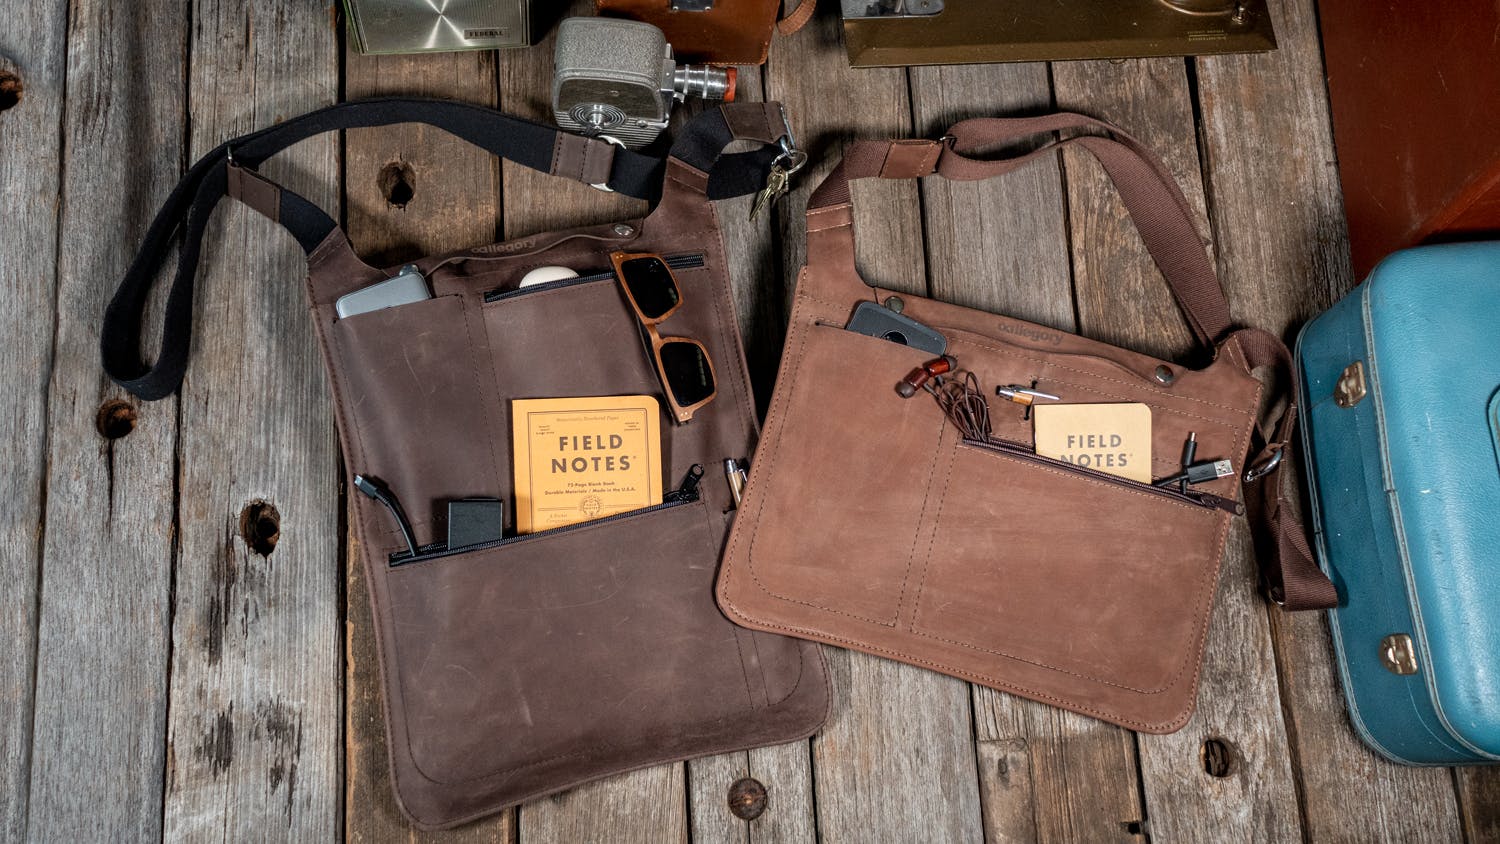 Flight Satchel 2.0 - Heirloom-quality Leather Bag For Those Who Travel Light.